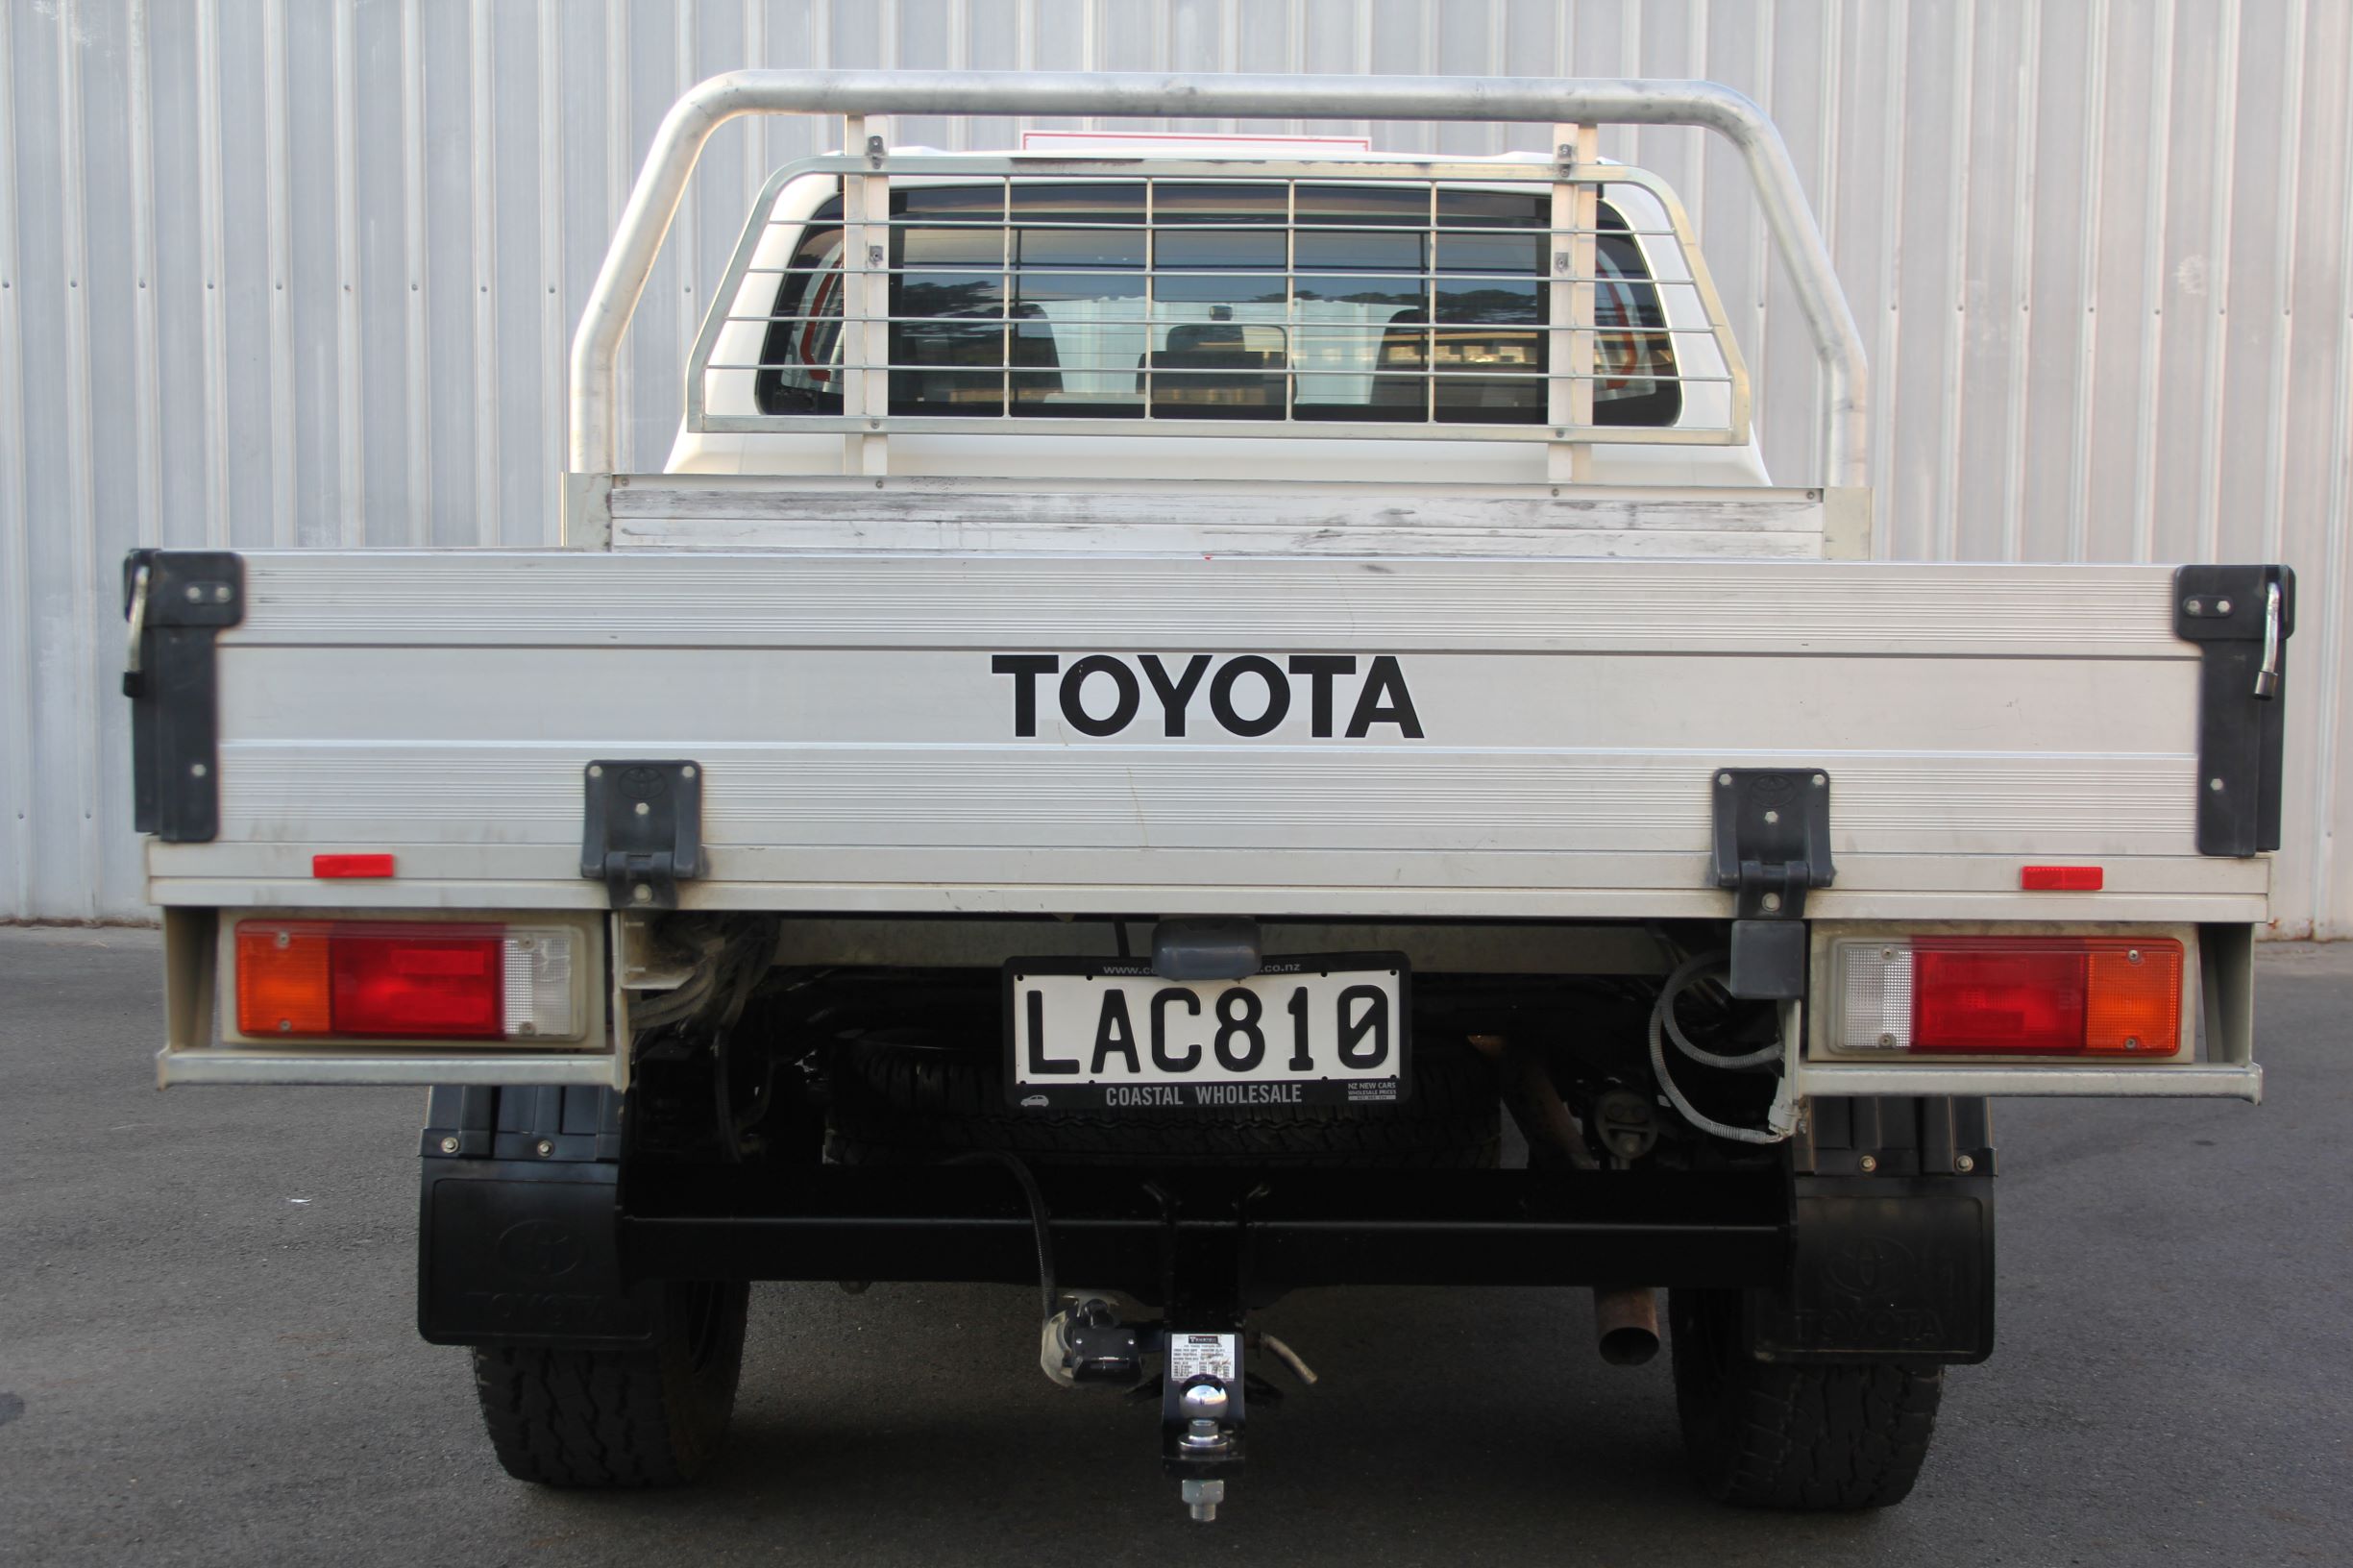 Toyota Hilux 4WD 2016 for sale in Auckland